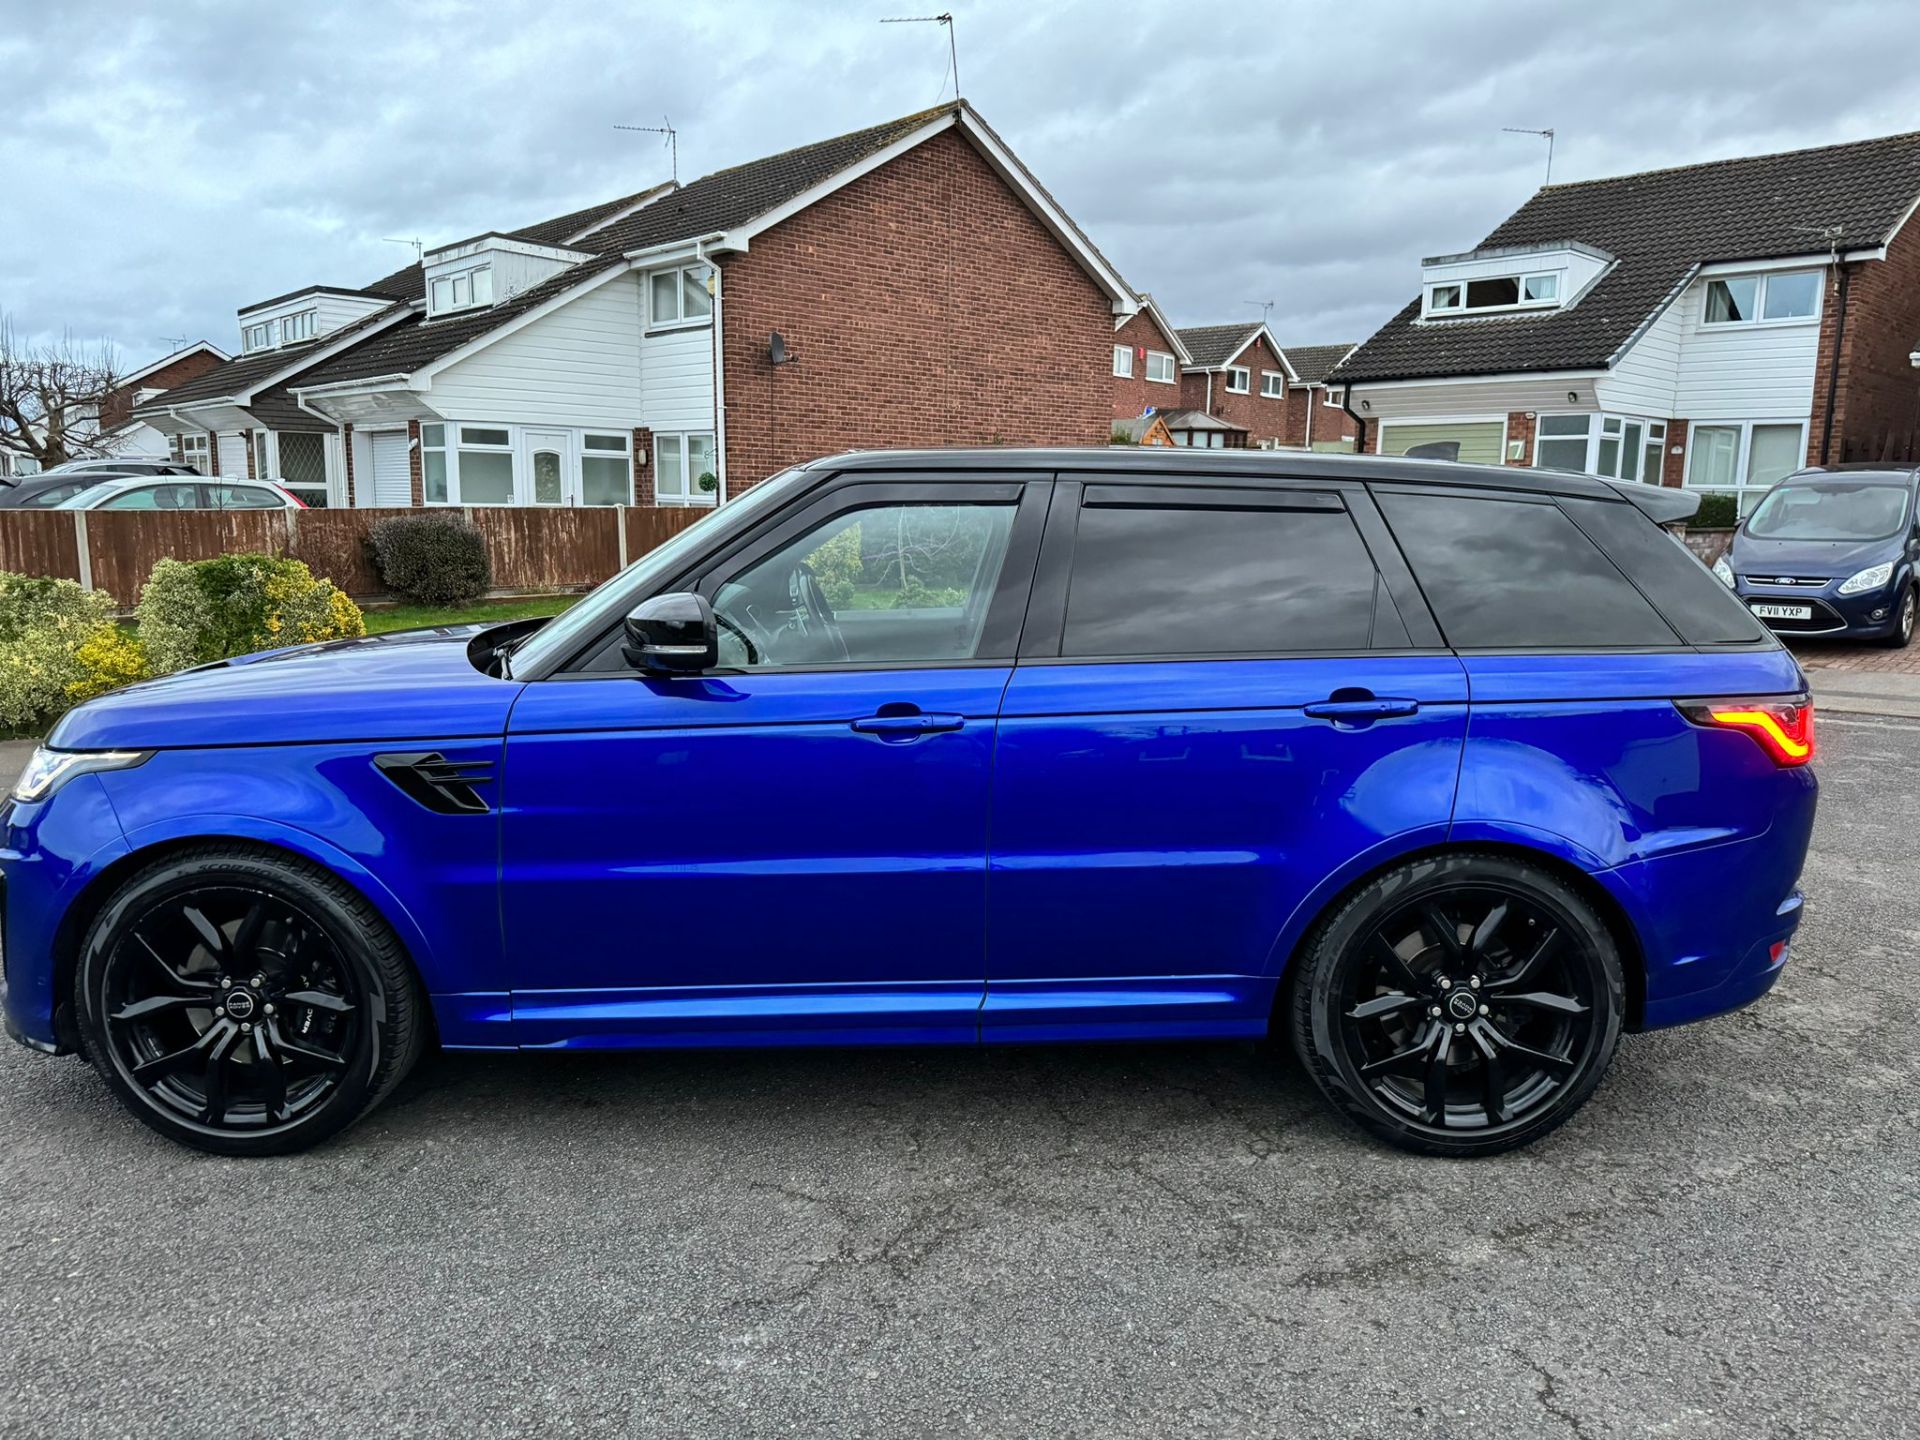 2018 18 RANGE ROVER SVR - 62K MILES WITH FULL LAND ROVER HISTORY - EXTREMELY CLEAN EXAMPLE - Image 5 of 10